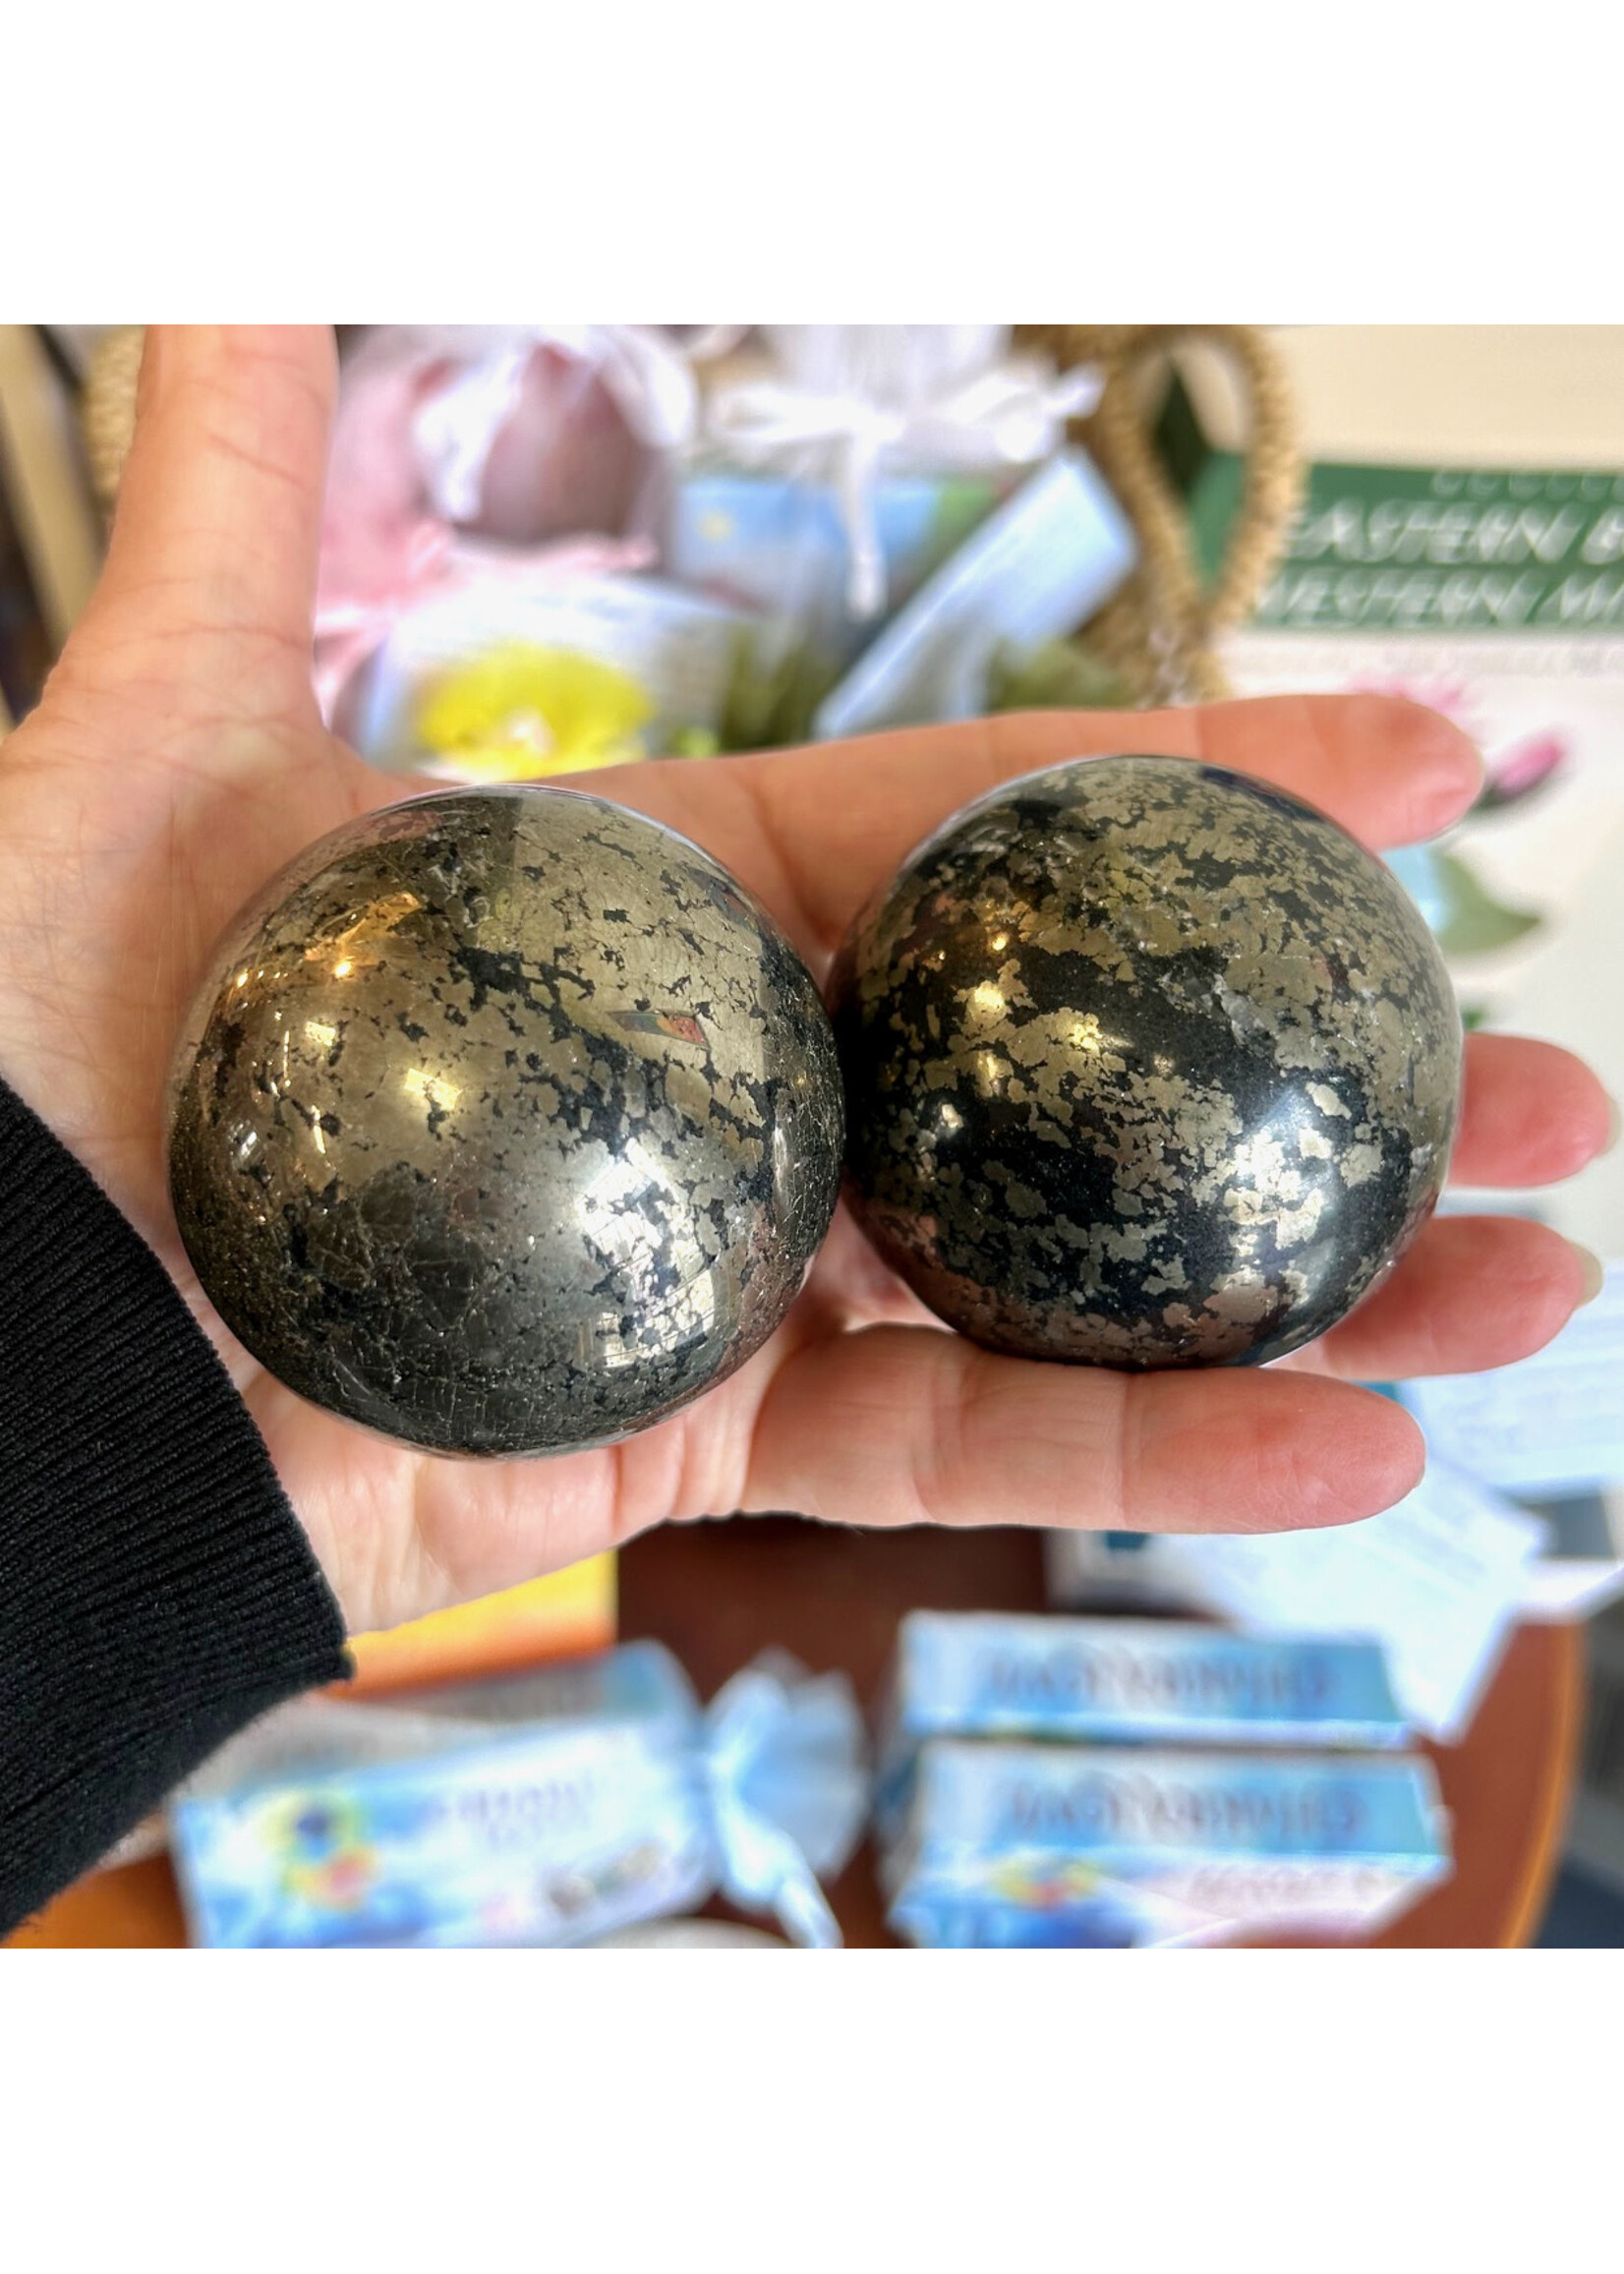 Pyrite Healer's Gold Spheres to accept your inner strength